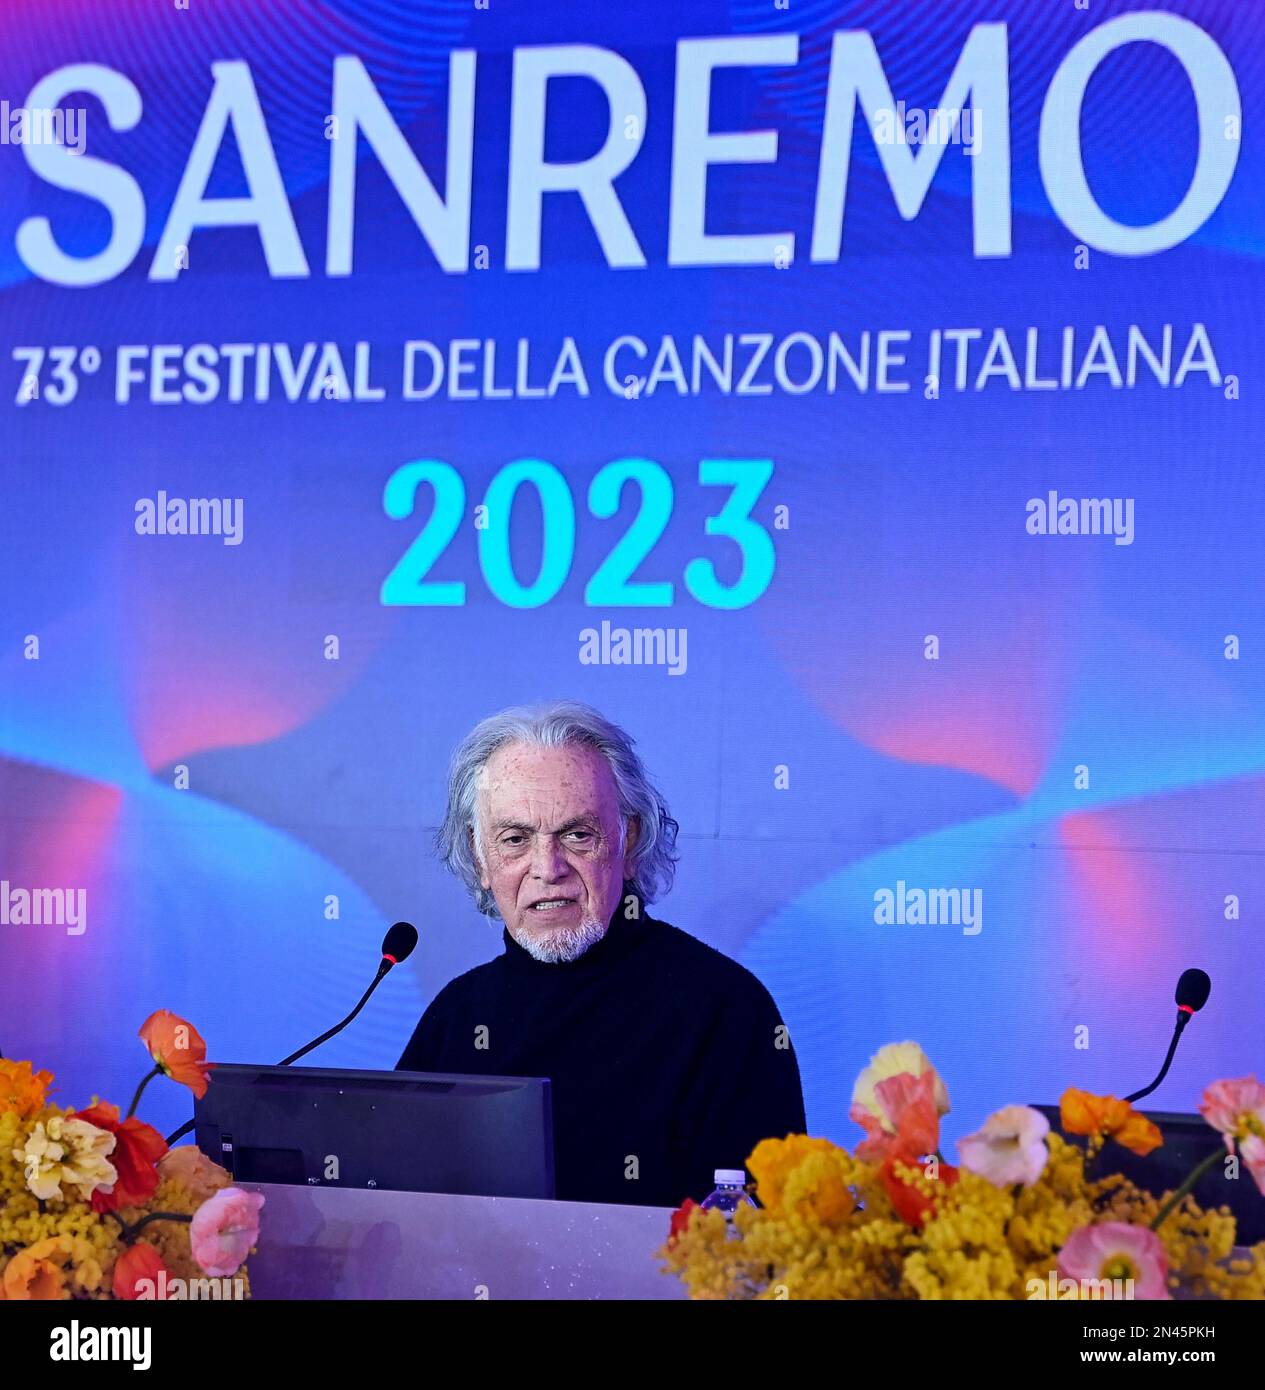 February 8, 2023, Sanremo: Former member of Italian band Pooh, Riccardo  Fogli, during a press conference at the 73rd Sanremo Italian Song Festival,  in Sanremo, Italy, 08 February 2023. The music festival